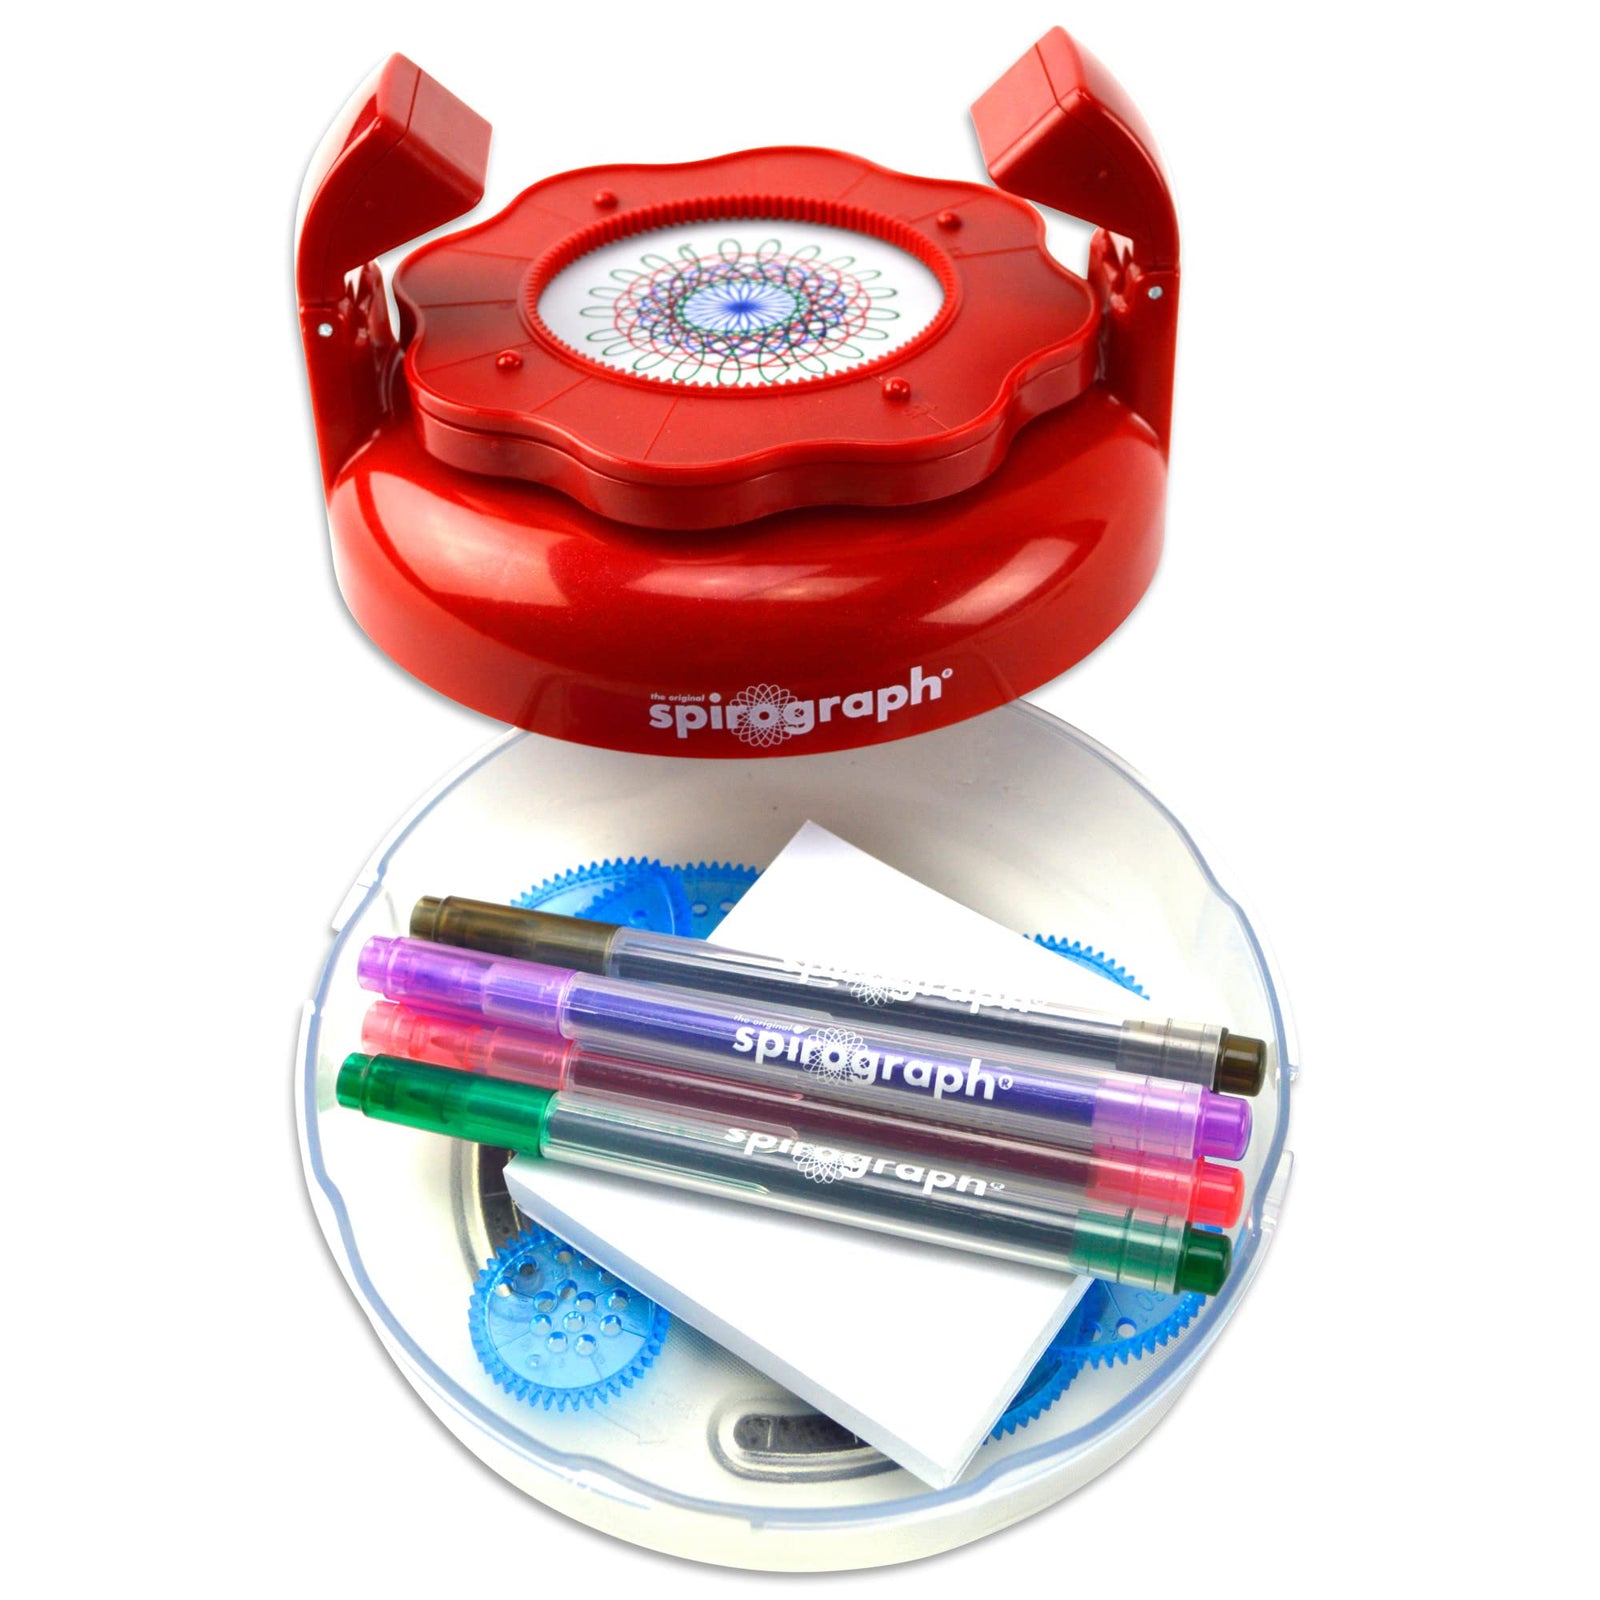 PlayMonster Spirograph -- Spirograph Animator -- The Classic Way to Make Countless Amazing Designs -- For Ages 8+